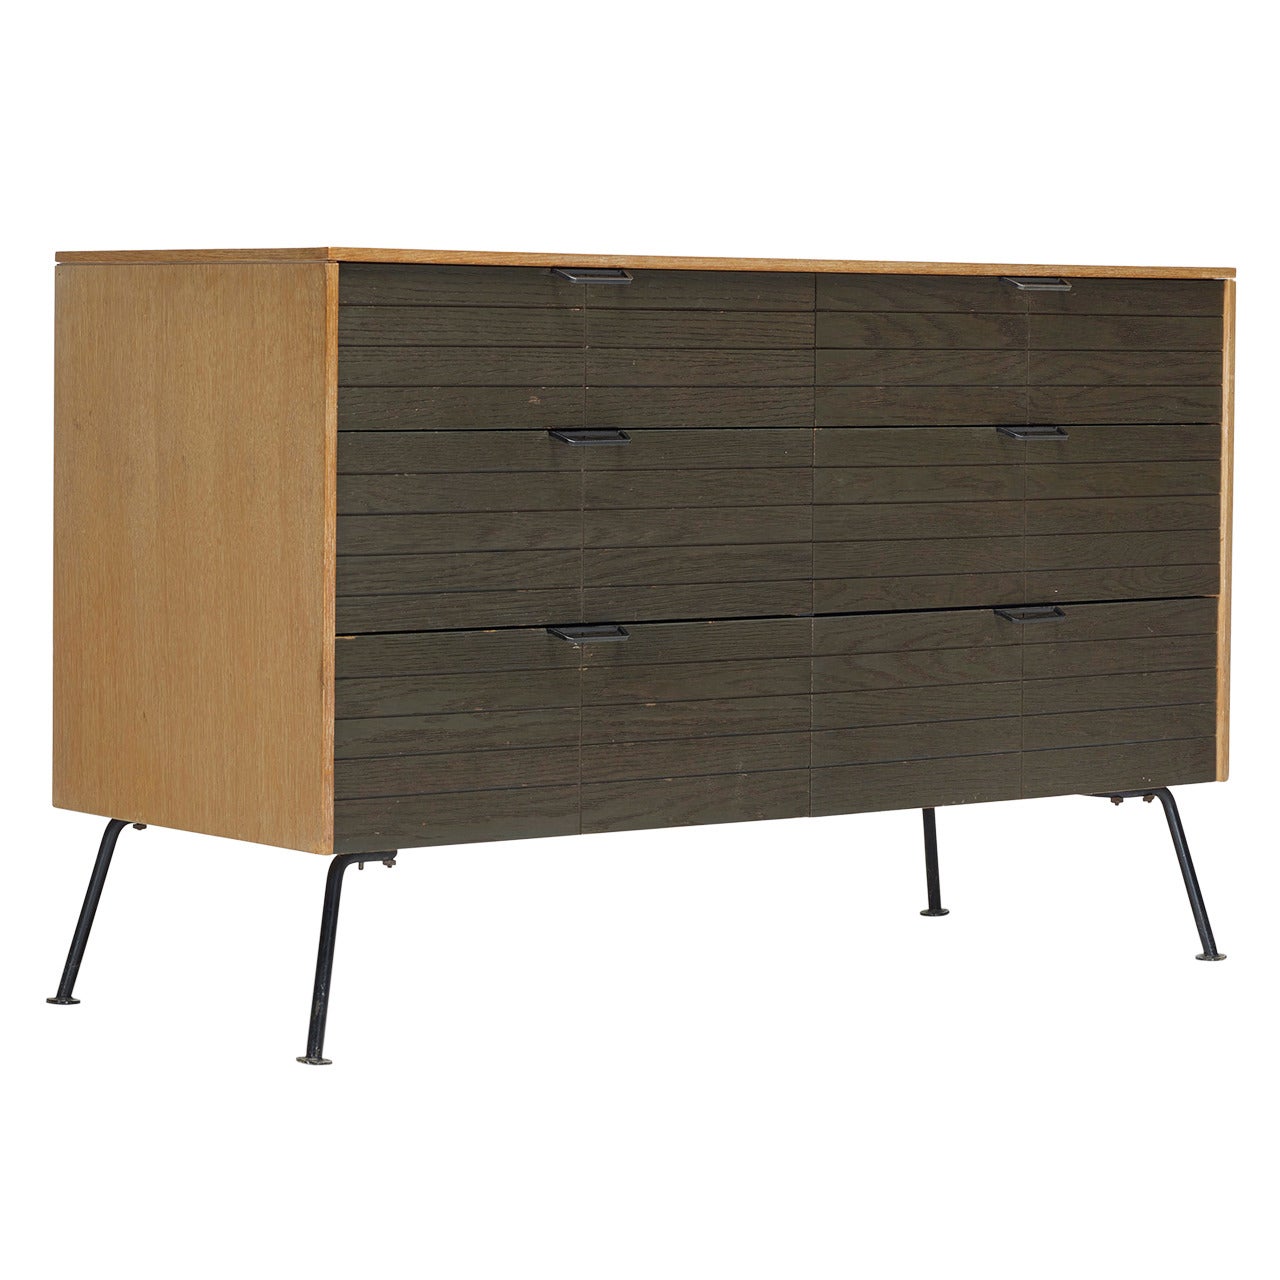 Cabinet by Raymond Loewy for Mengel Furniture Company